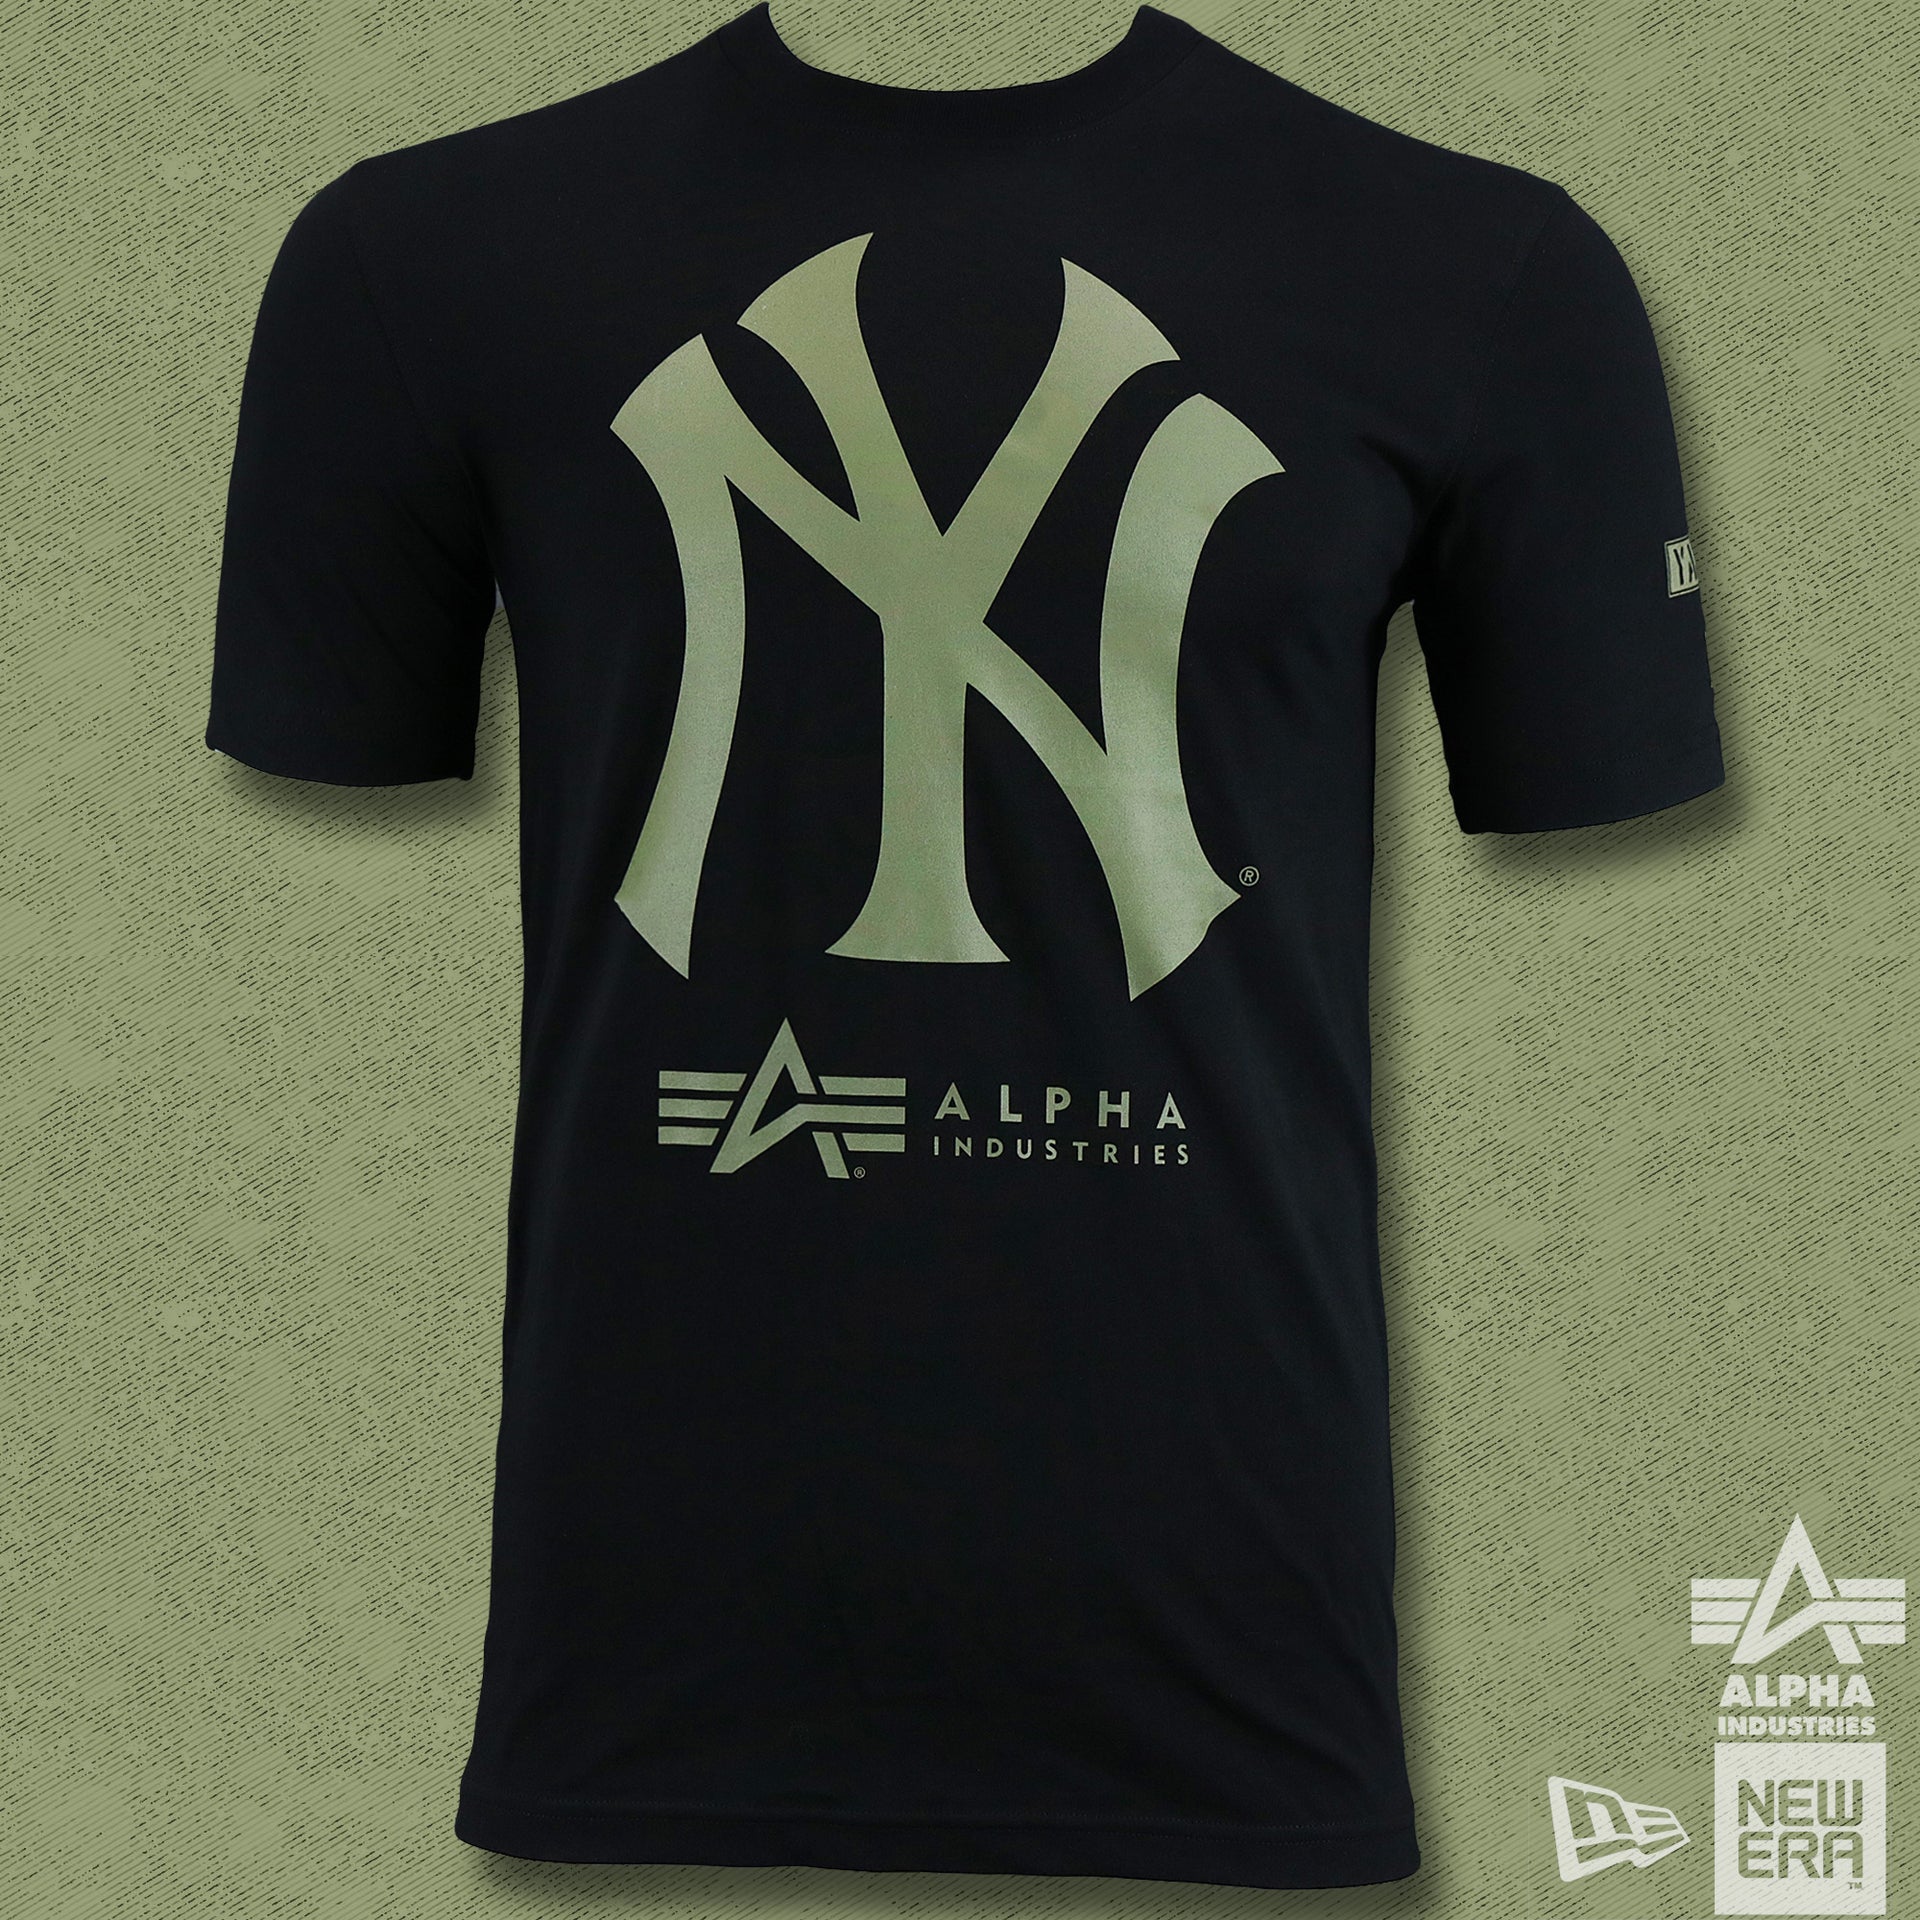 The New York Yankees Sports Unite Us Alpha Industries Armed Forces T-Shirt | Black Tshirt